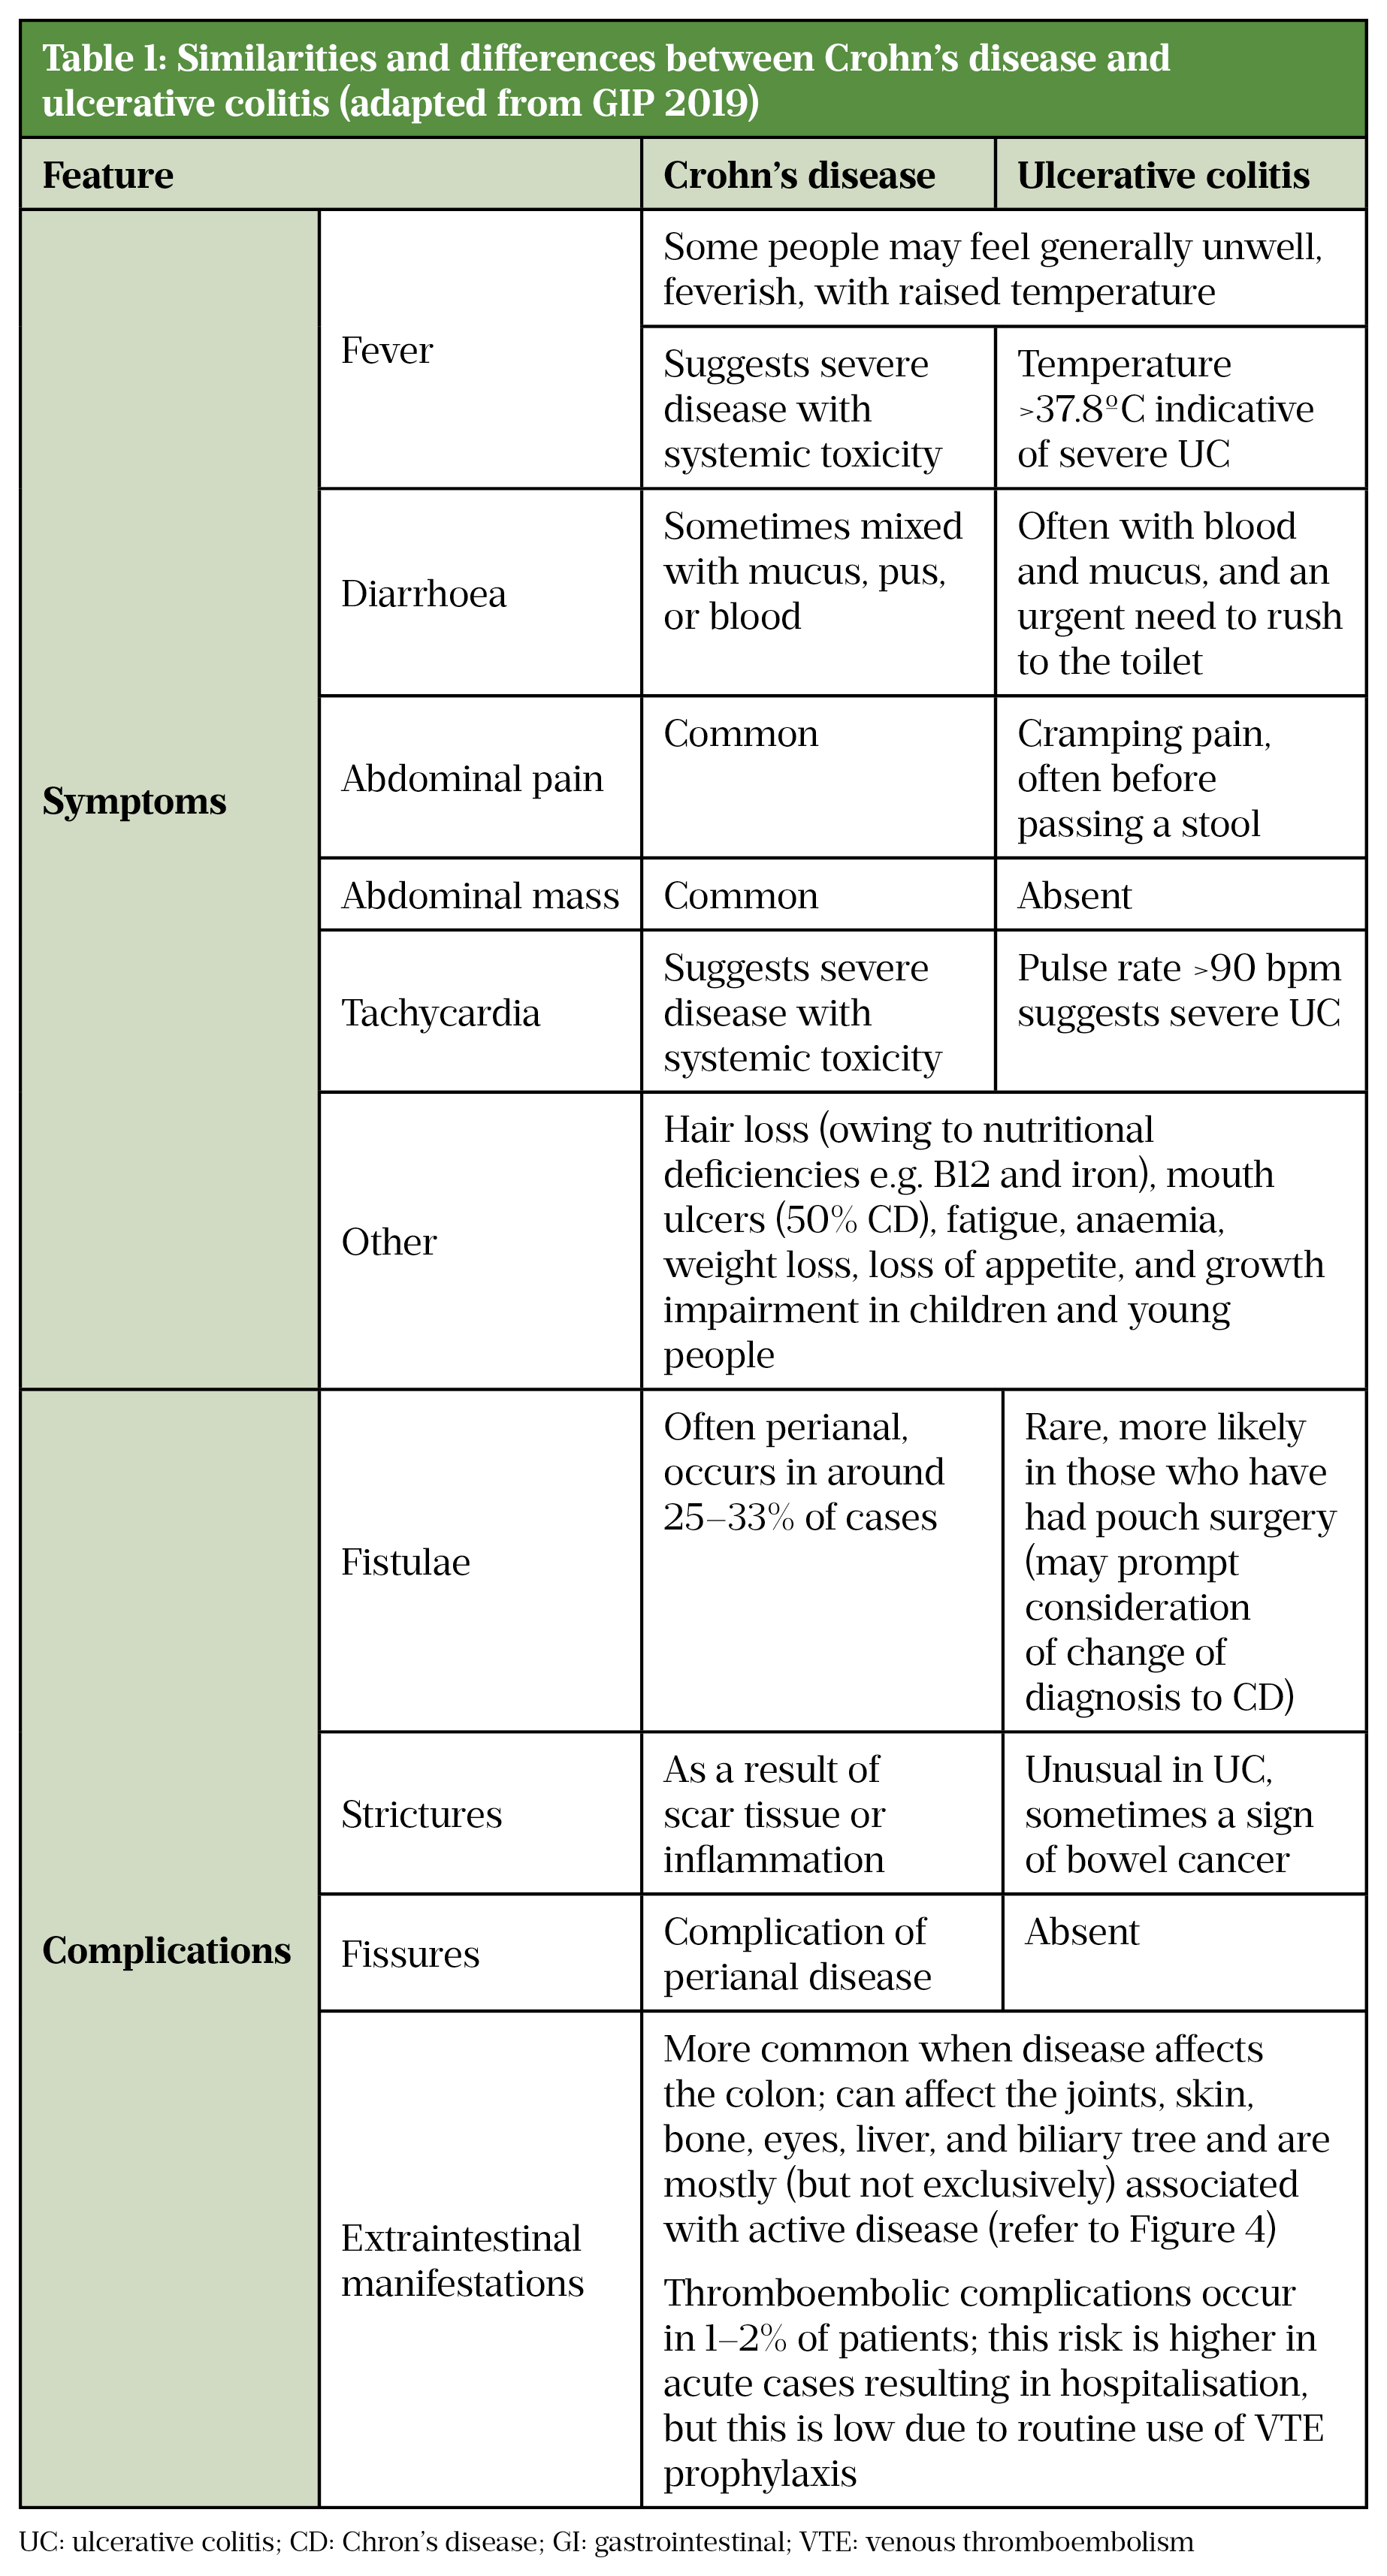 Table 1 Similarities and differences between Crohn’s disease and ulcerative colitis 